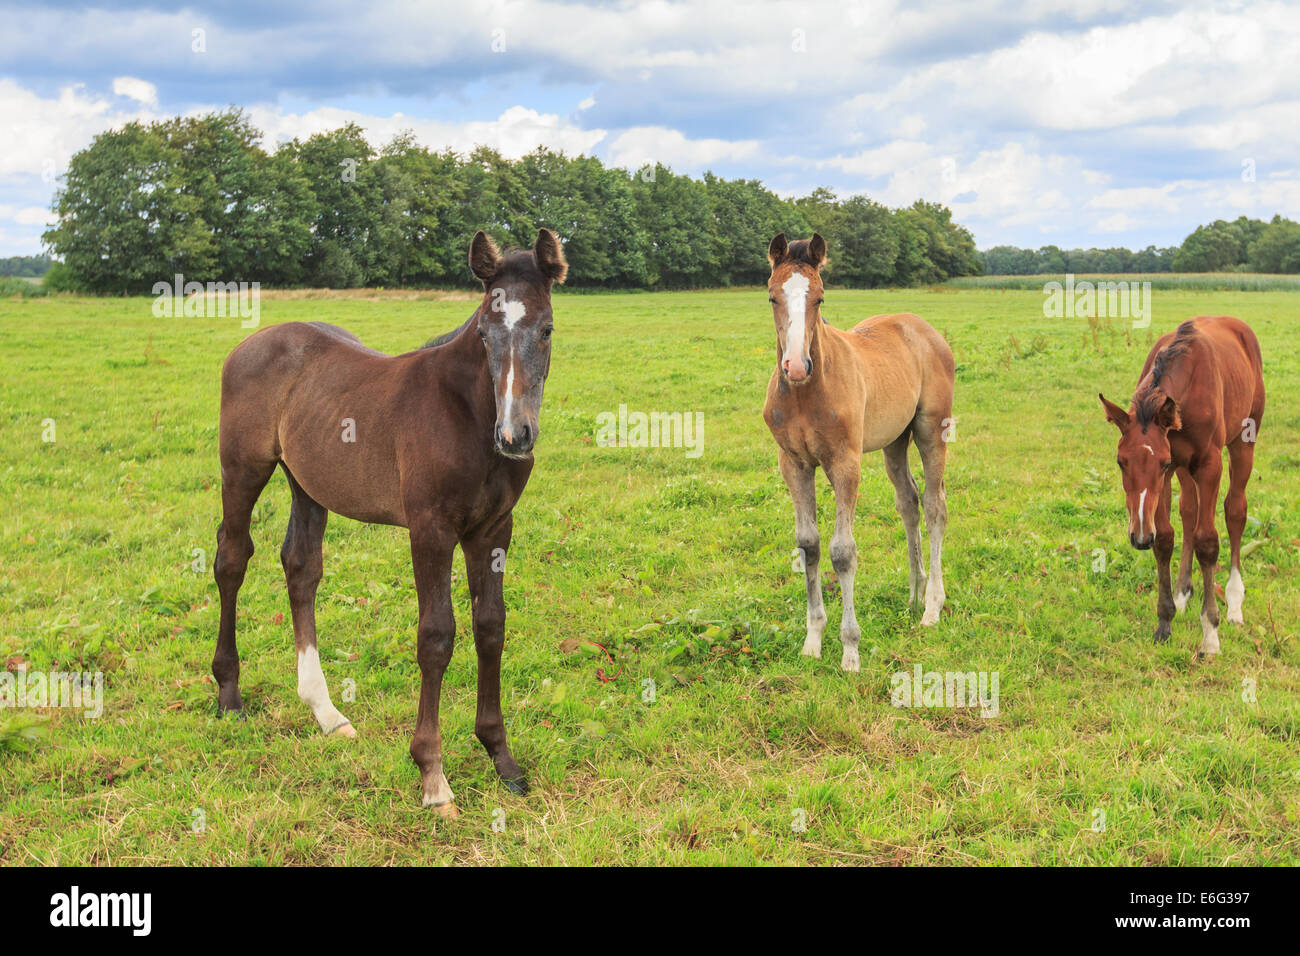 Three foals, young horses, stand together curious to look in a green meadow with trees in the background Stock Photo